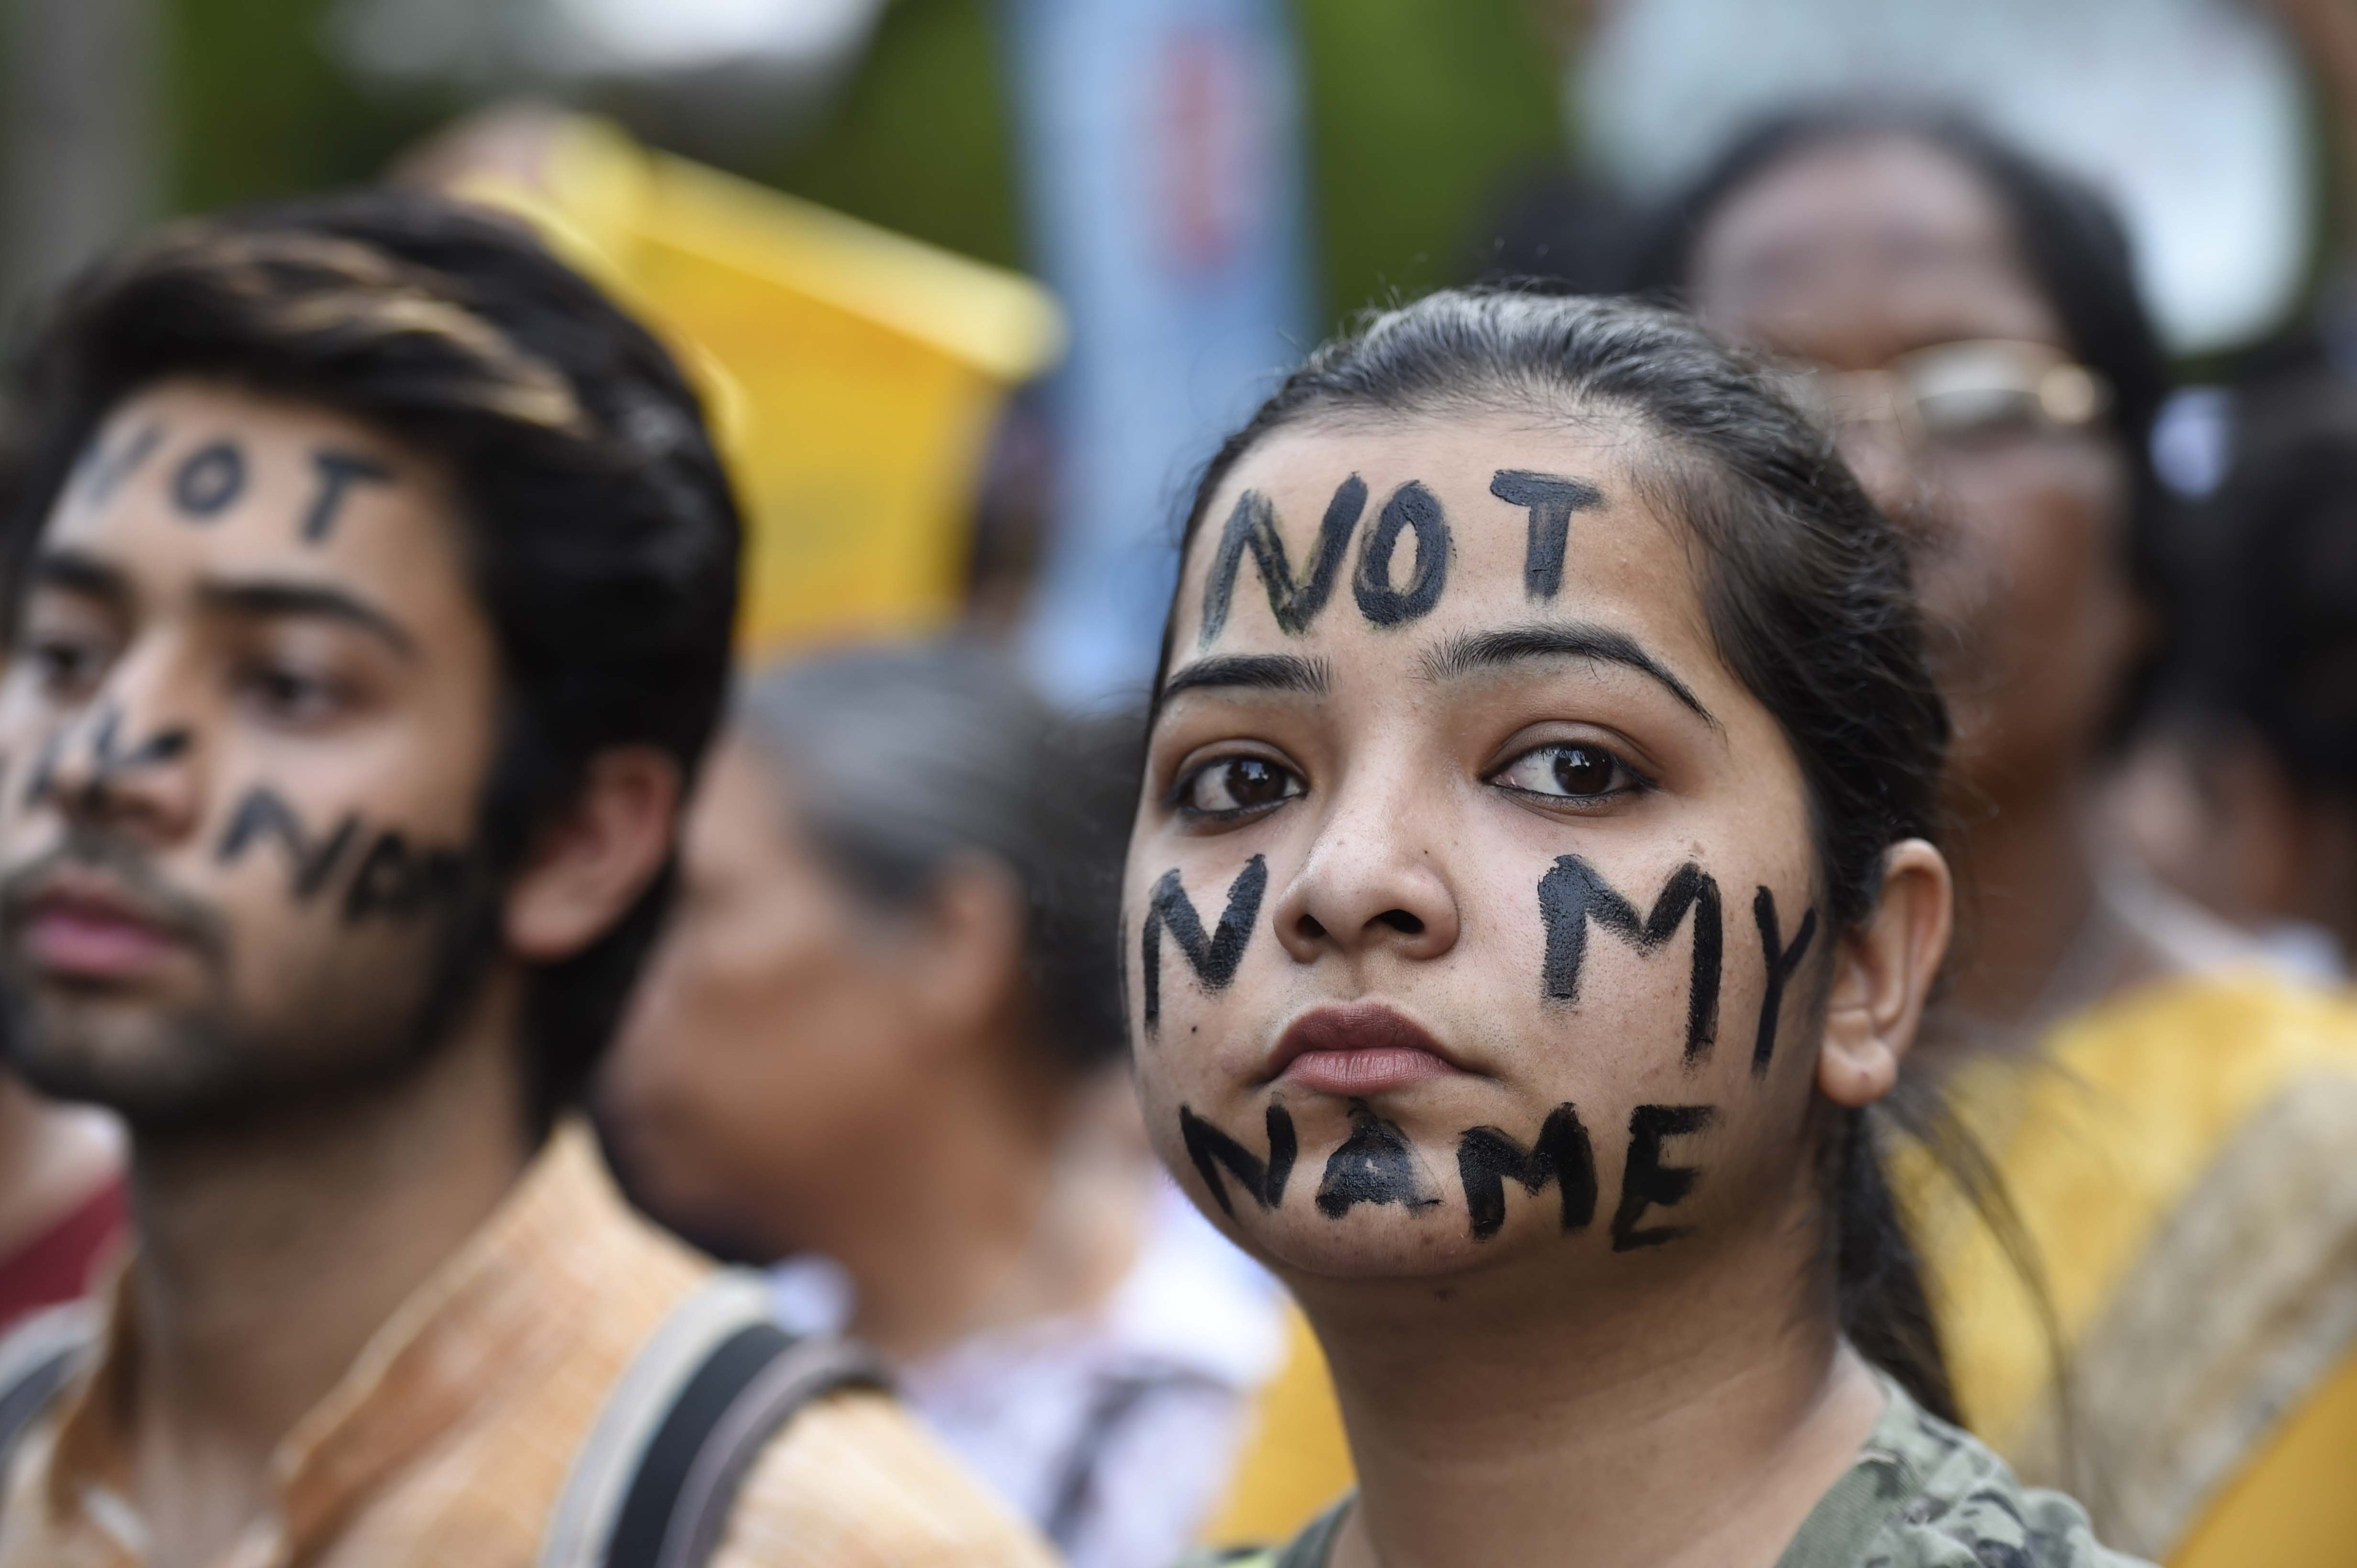 People take part in a 'Not In My Name' protest against the Kathua and Unnao rape cases, New Delhi, April 15, 2018. (Arvind Yadav&mdash;Hindustan Times/Getty Images)